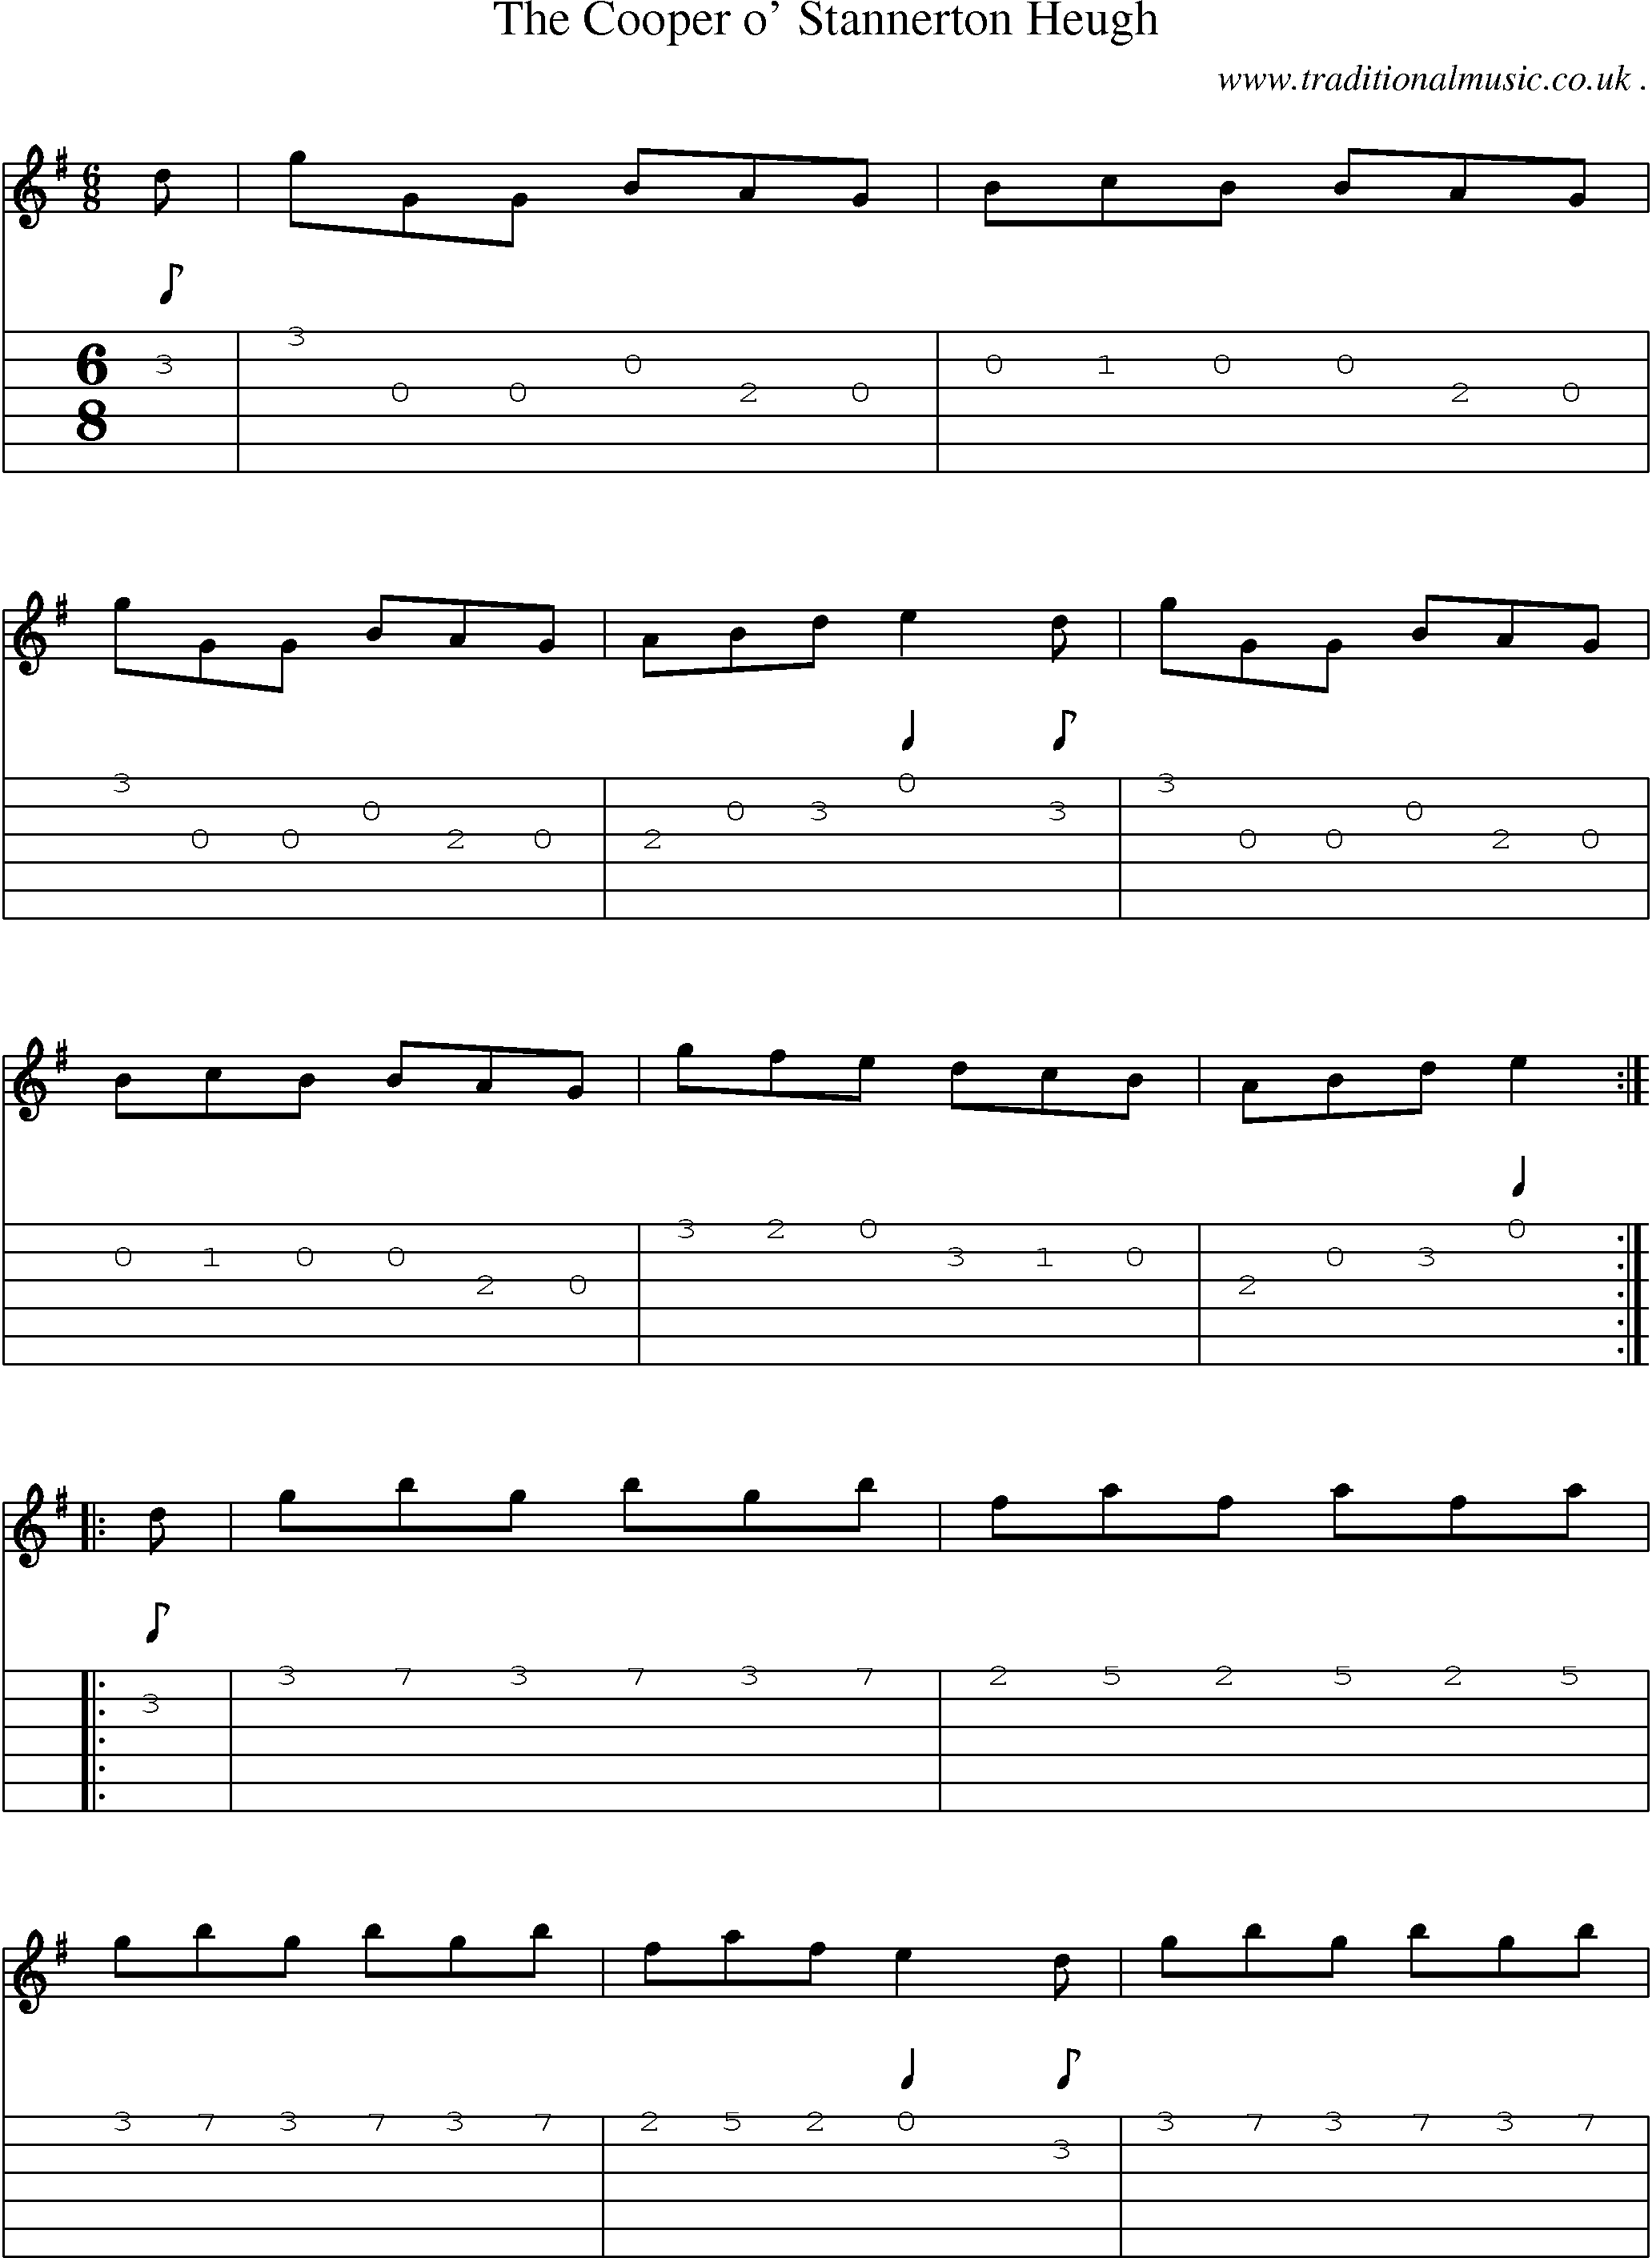 Sheet-Music and Guitar Tabs for The Cooper O Stannerton Heugh